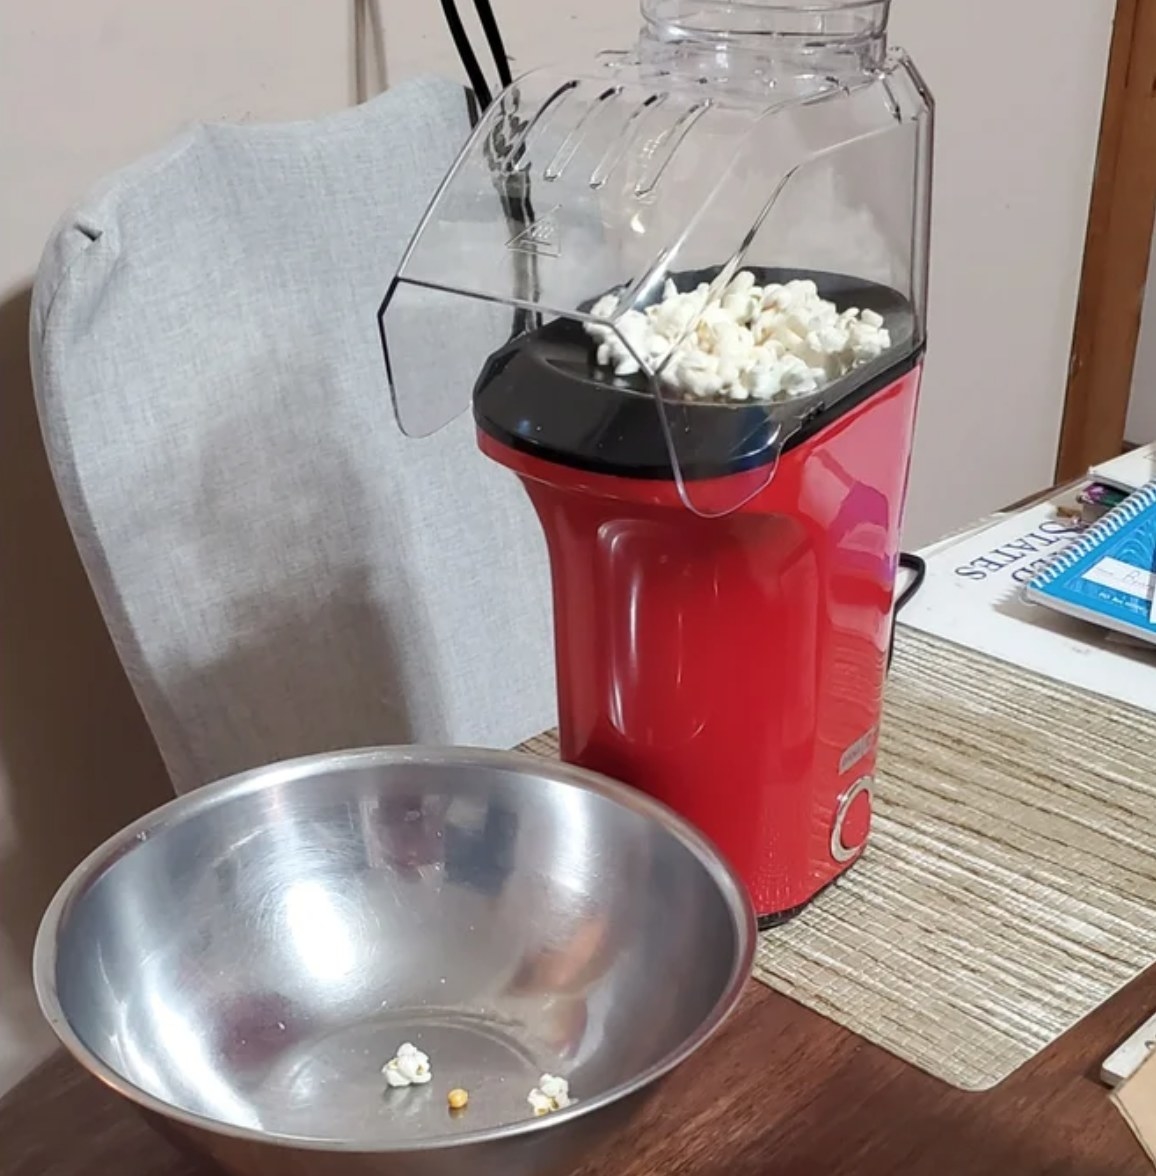 a red popcorn machine filled with fresh popcorn next to a metal bowl